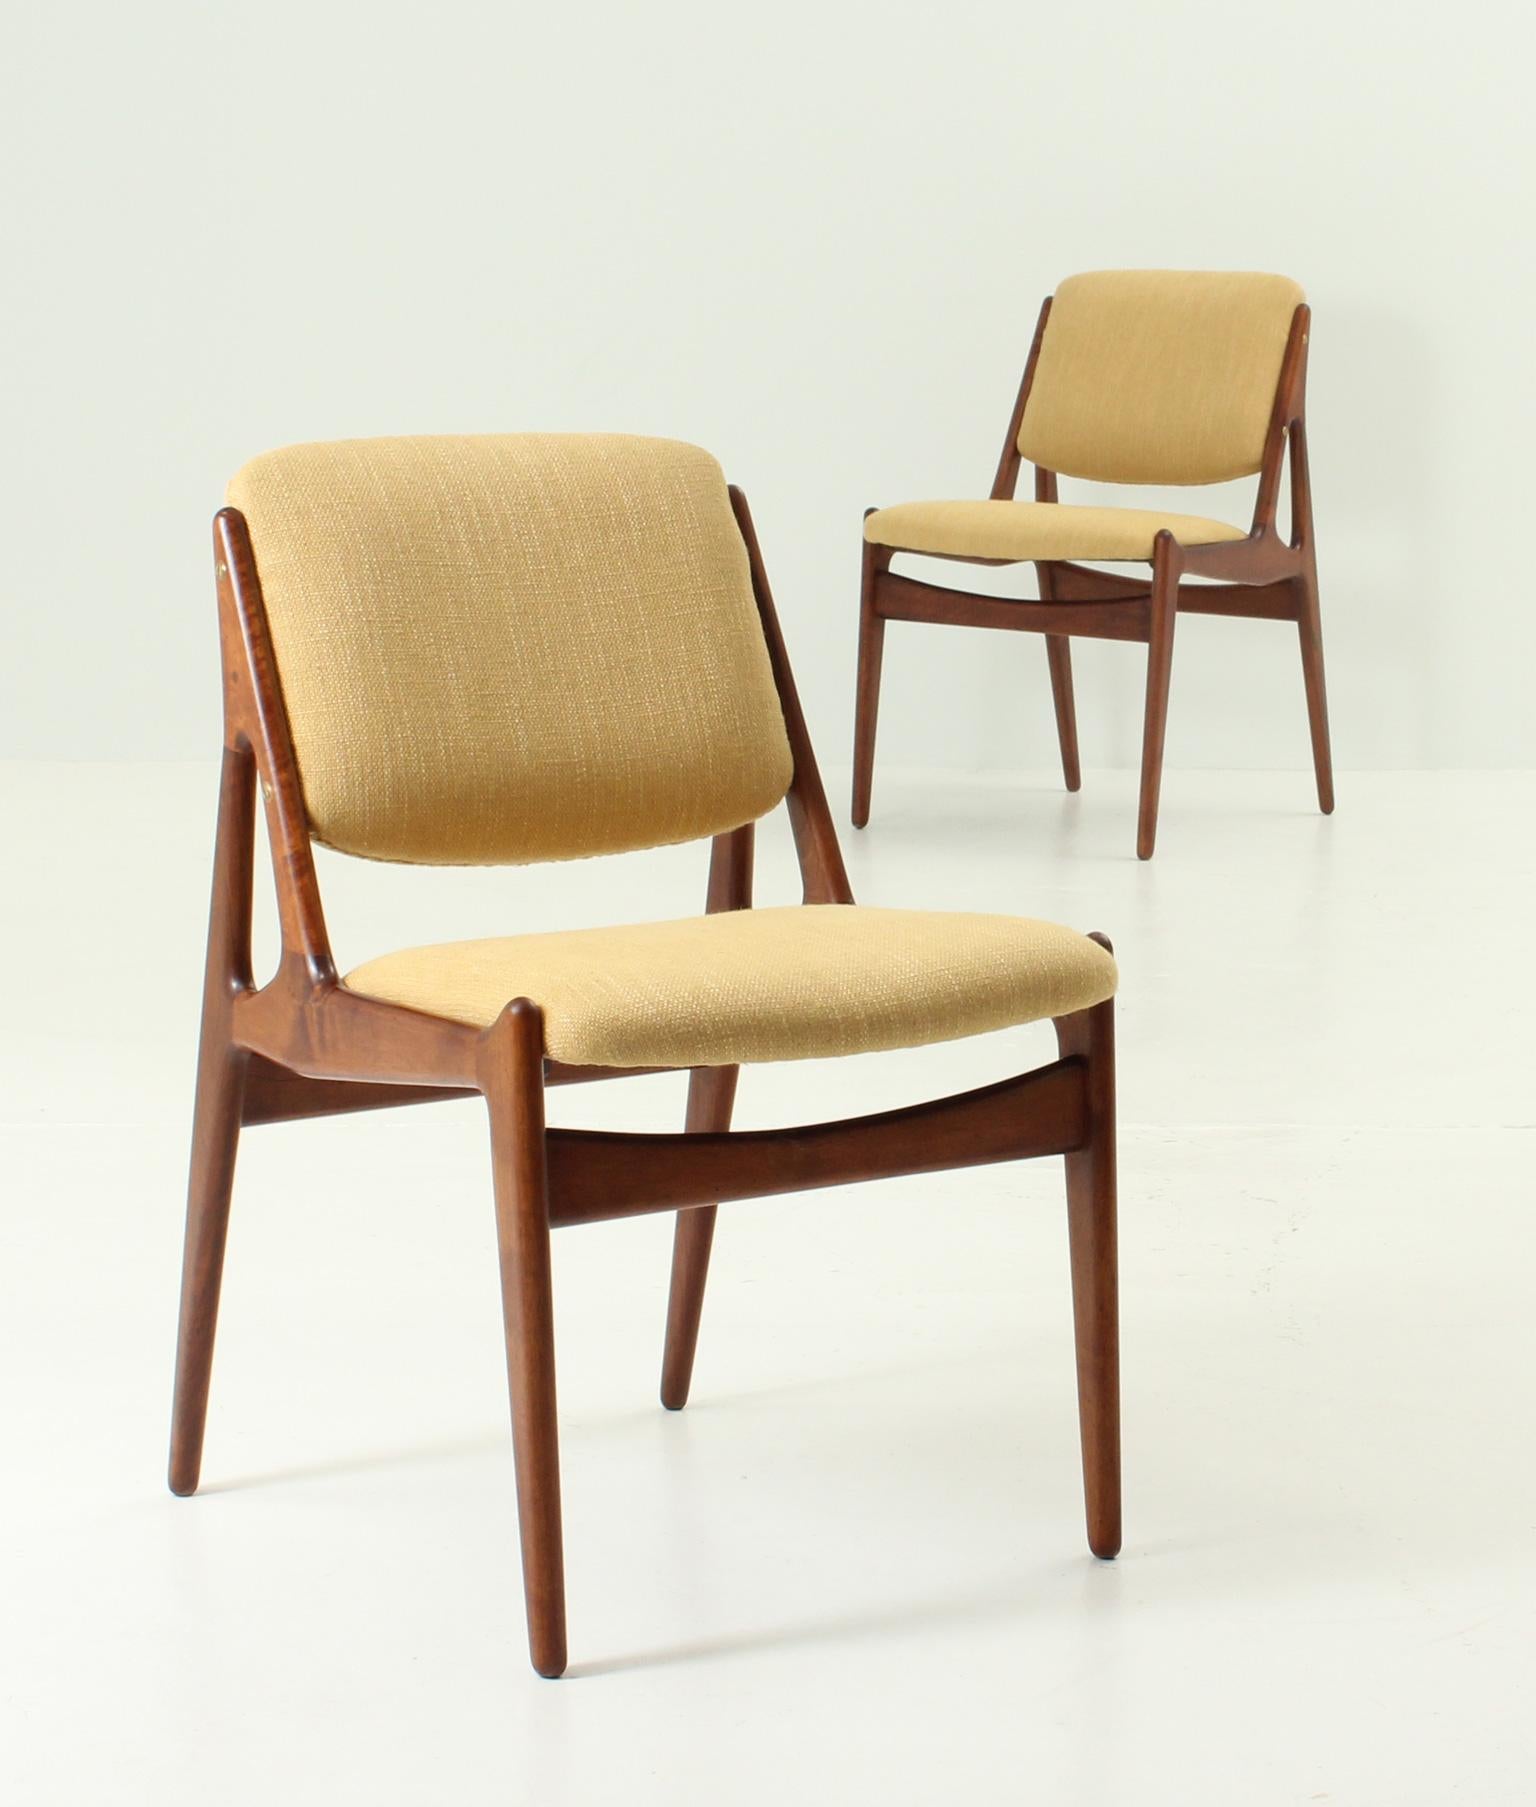 Fabric Pair of Ella Chairs in Walnut by Arne Vodder, 1962